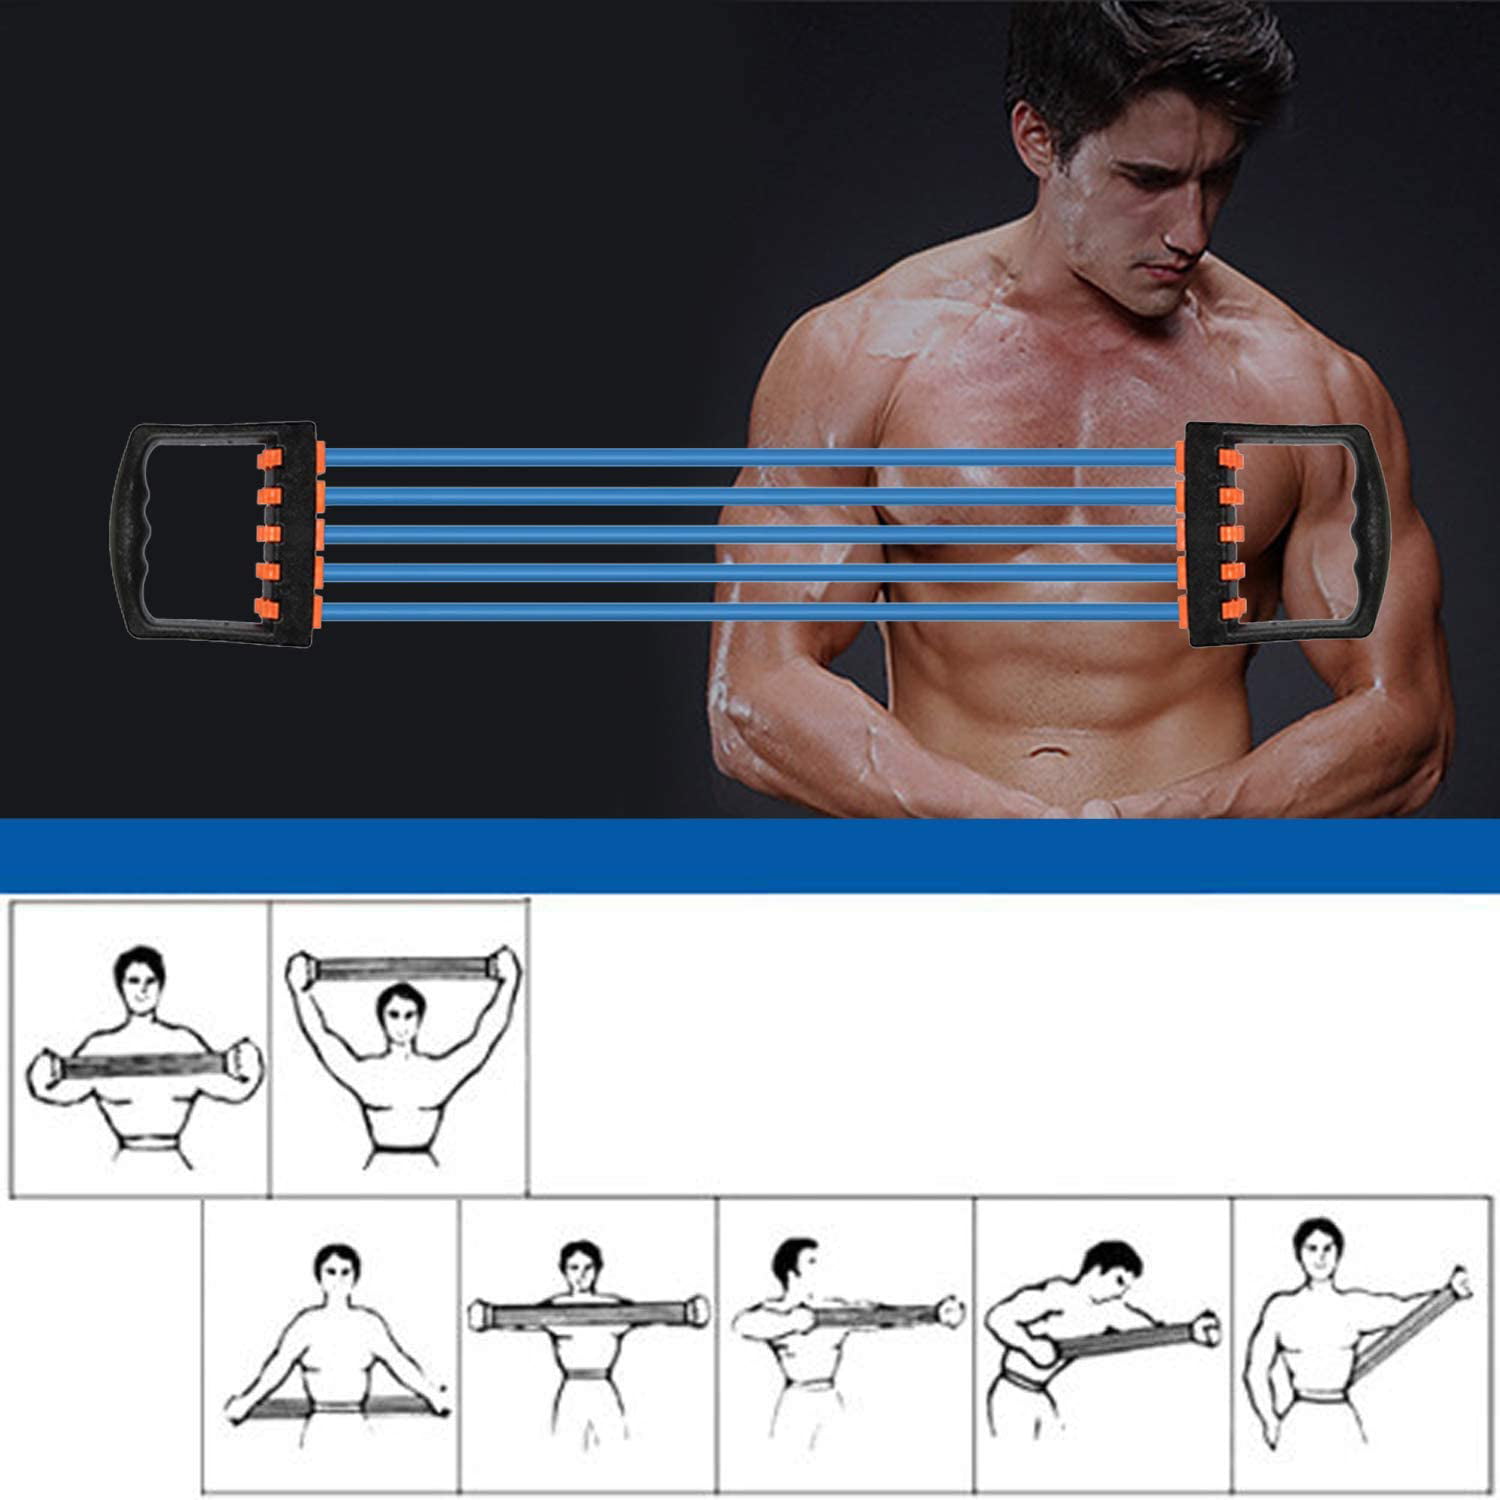 Chest Expander 5 Tubes Are Detachable Natural Latex Double Tube Design Pull Rope Suitable For Home Office Pectoral Muscle Training Exercise Pectoral Muscle Trainer